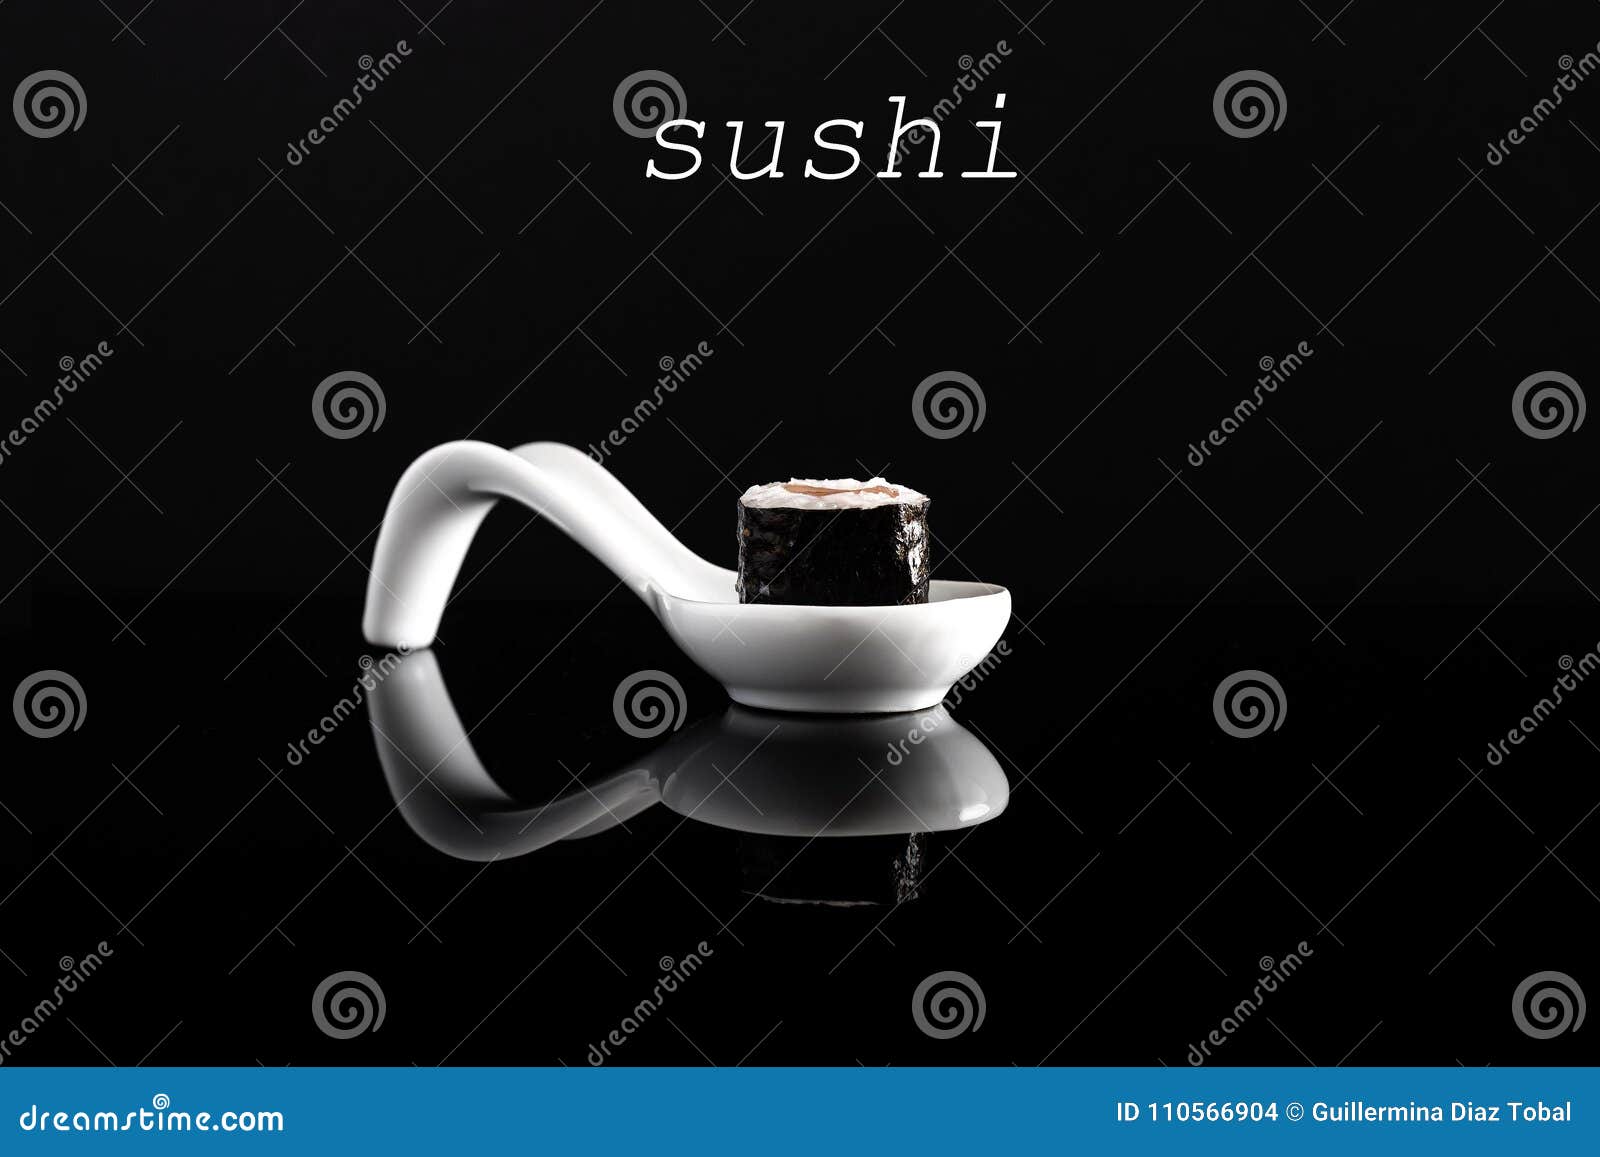 sushi 0n white spoon with black background.